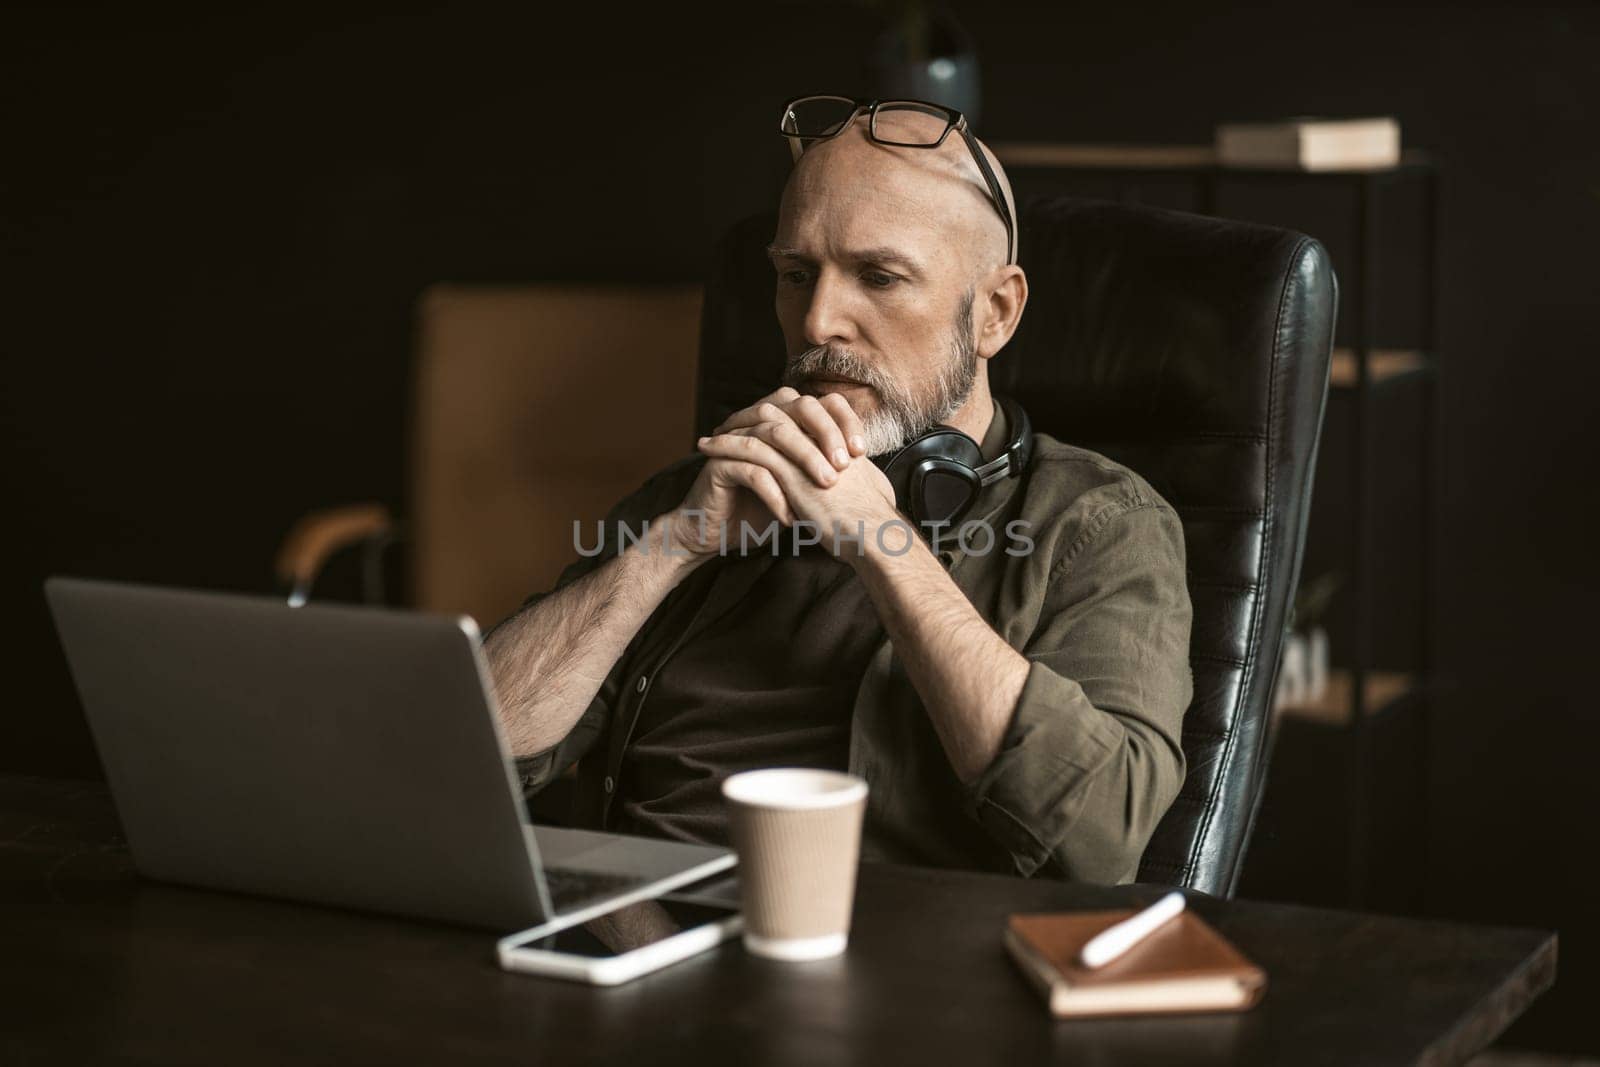 Dedicated elderly worker in loft office environment. With puzzled expression on his face, he sits attentively in front of a computer, deeply engaged in solving a complex problem. . High quality photo